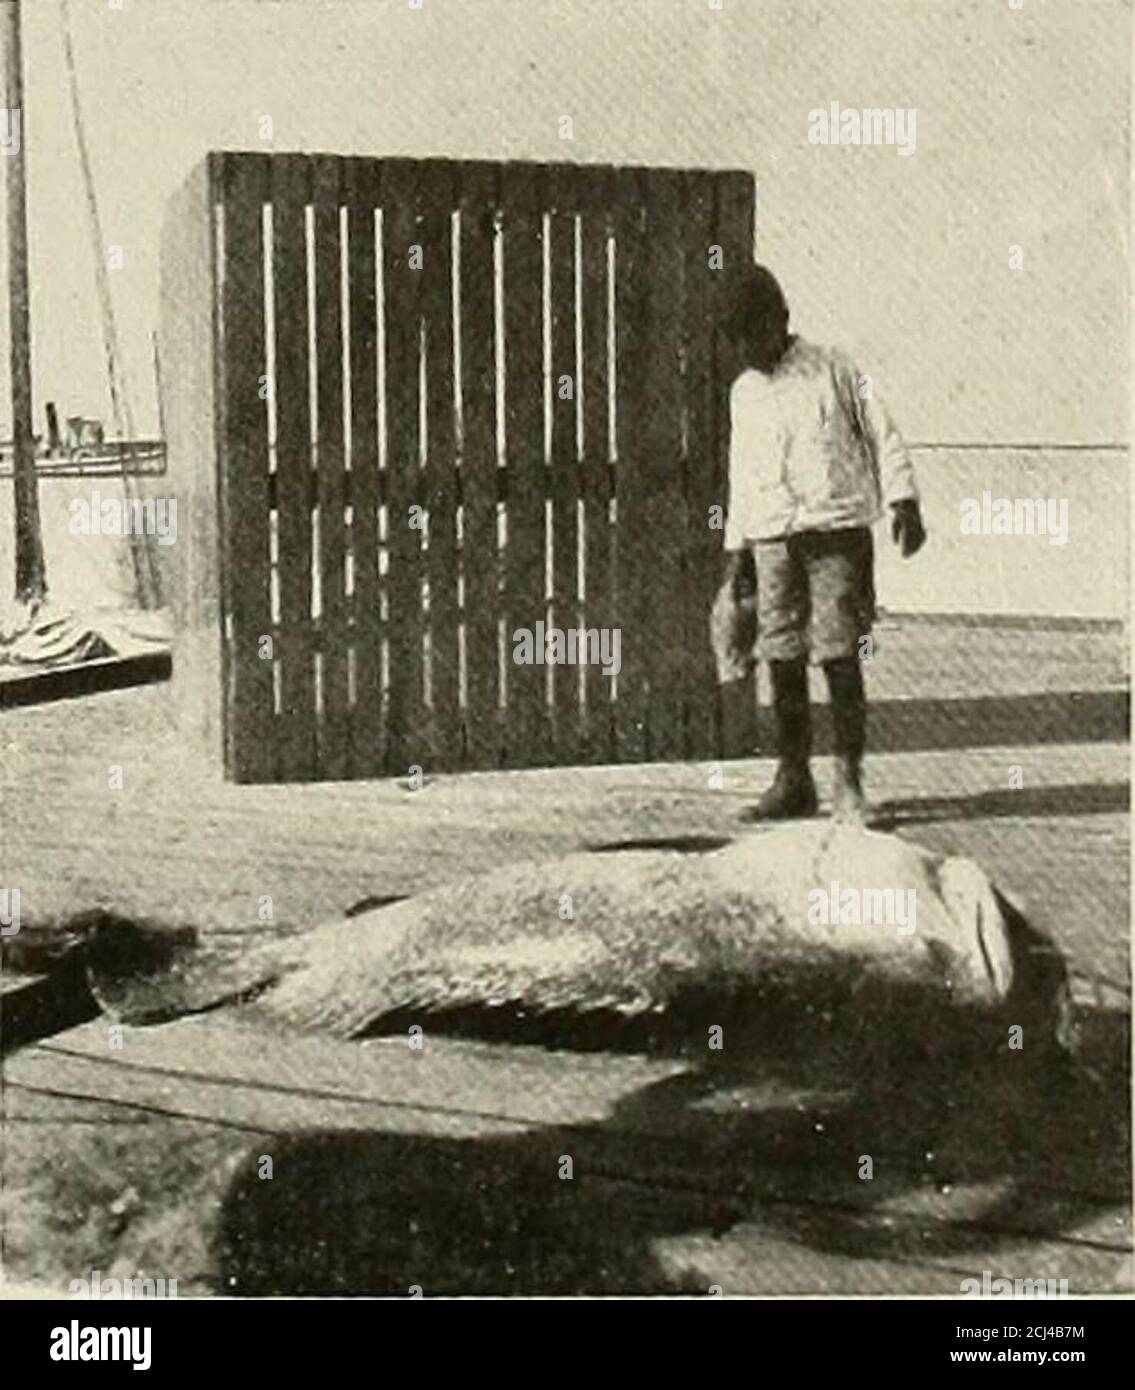 . Zoological Society bulletin . LARGE JEWFISH, IN FISH-CAR BESIDE A SMACK.. A BIG JEWFISH, KILLED WITH A HATCHET. 800 ZOOLOGICAL SOCIETY BULLETIN. Some of the fishermen who have larger boatsgo out for a week and return with a load ofgroupers. If one has no motor and is becalmedthere will not be enough circulation in the over-crowded well and many of the fish will die un-less bailing is resorted to for aerating the water.Often a boat with a motor will tow in its be-calmed brother and thus save many dollars worthof fish, or the fisherman may resort to scullinghis heavy boat. It is a strange thin Stock Photo